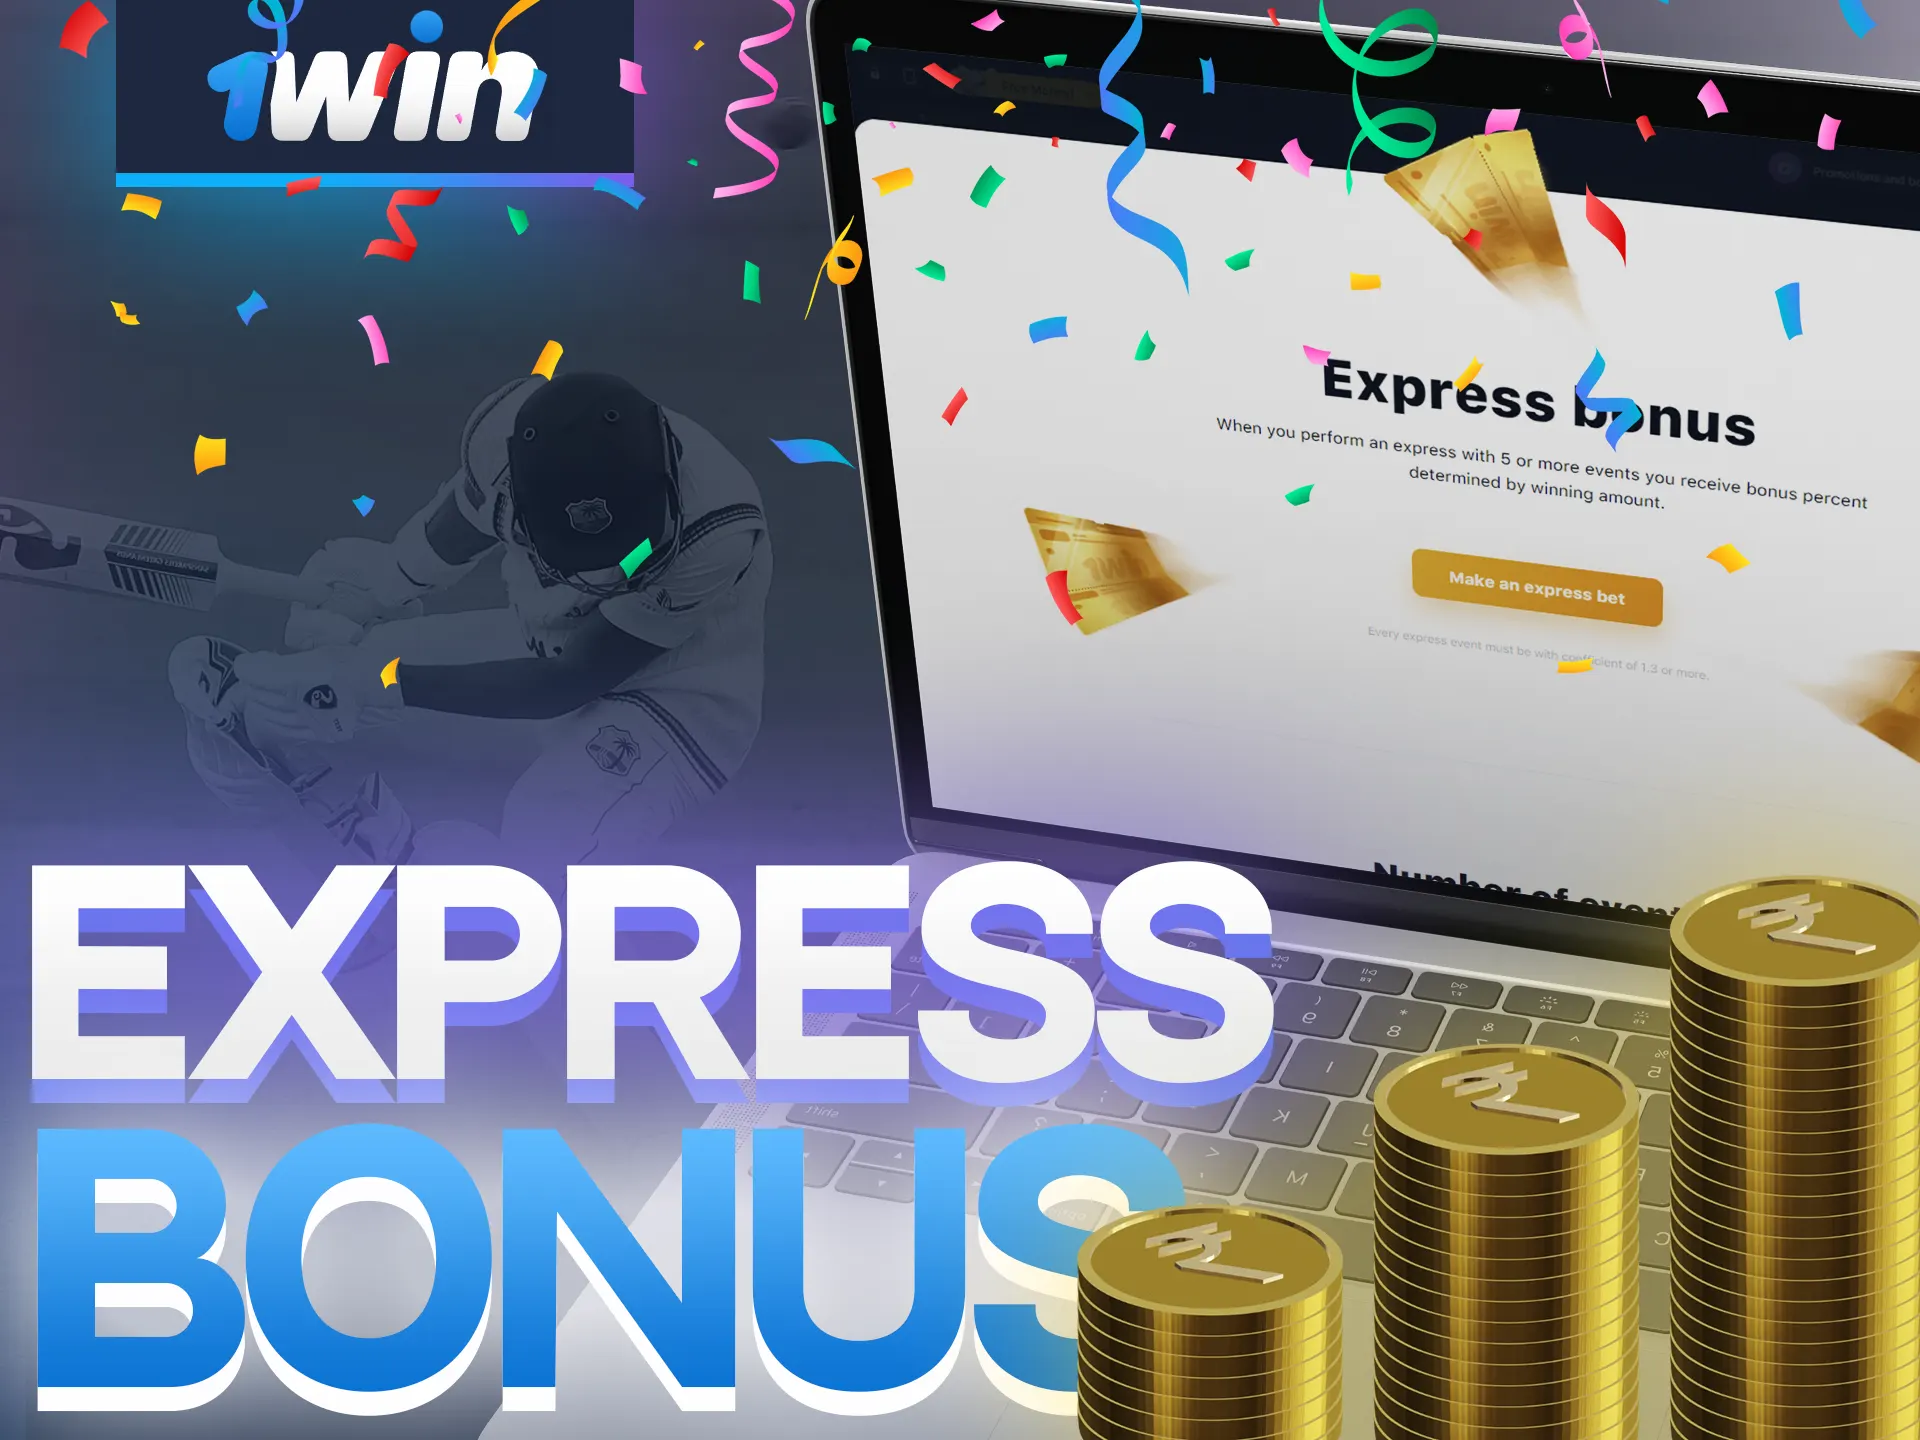 Get a special express bonus from 1Win.